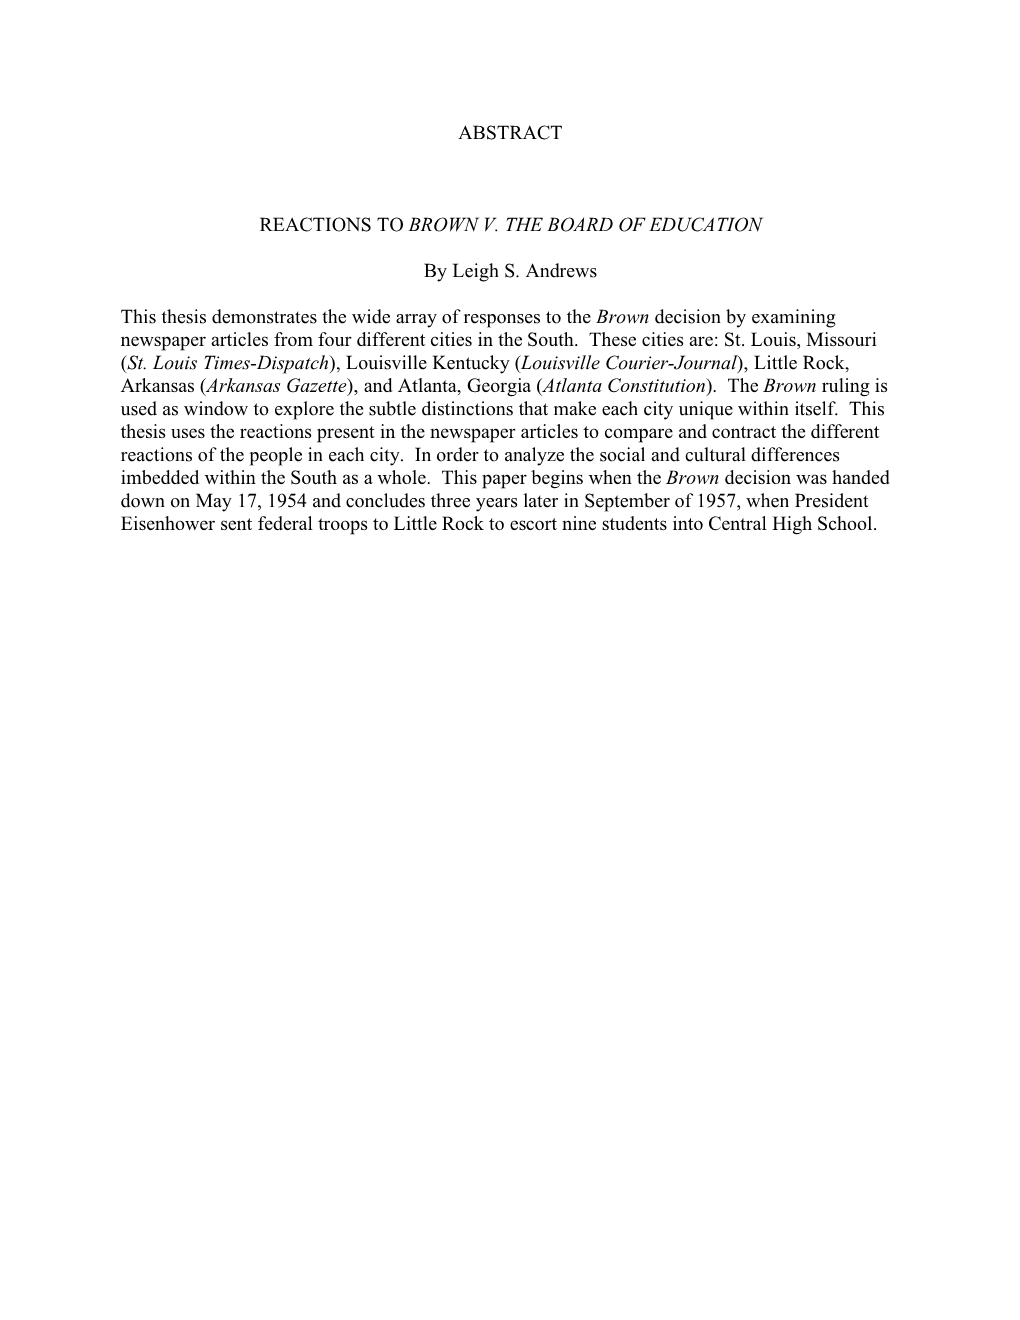 ABSTRACT REACTIONS to BROWN V. the BOARD of EDUCATION By